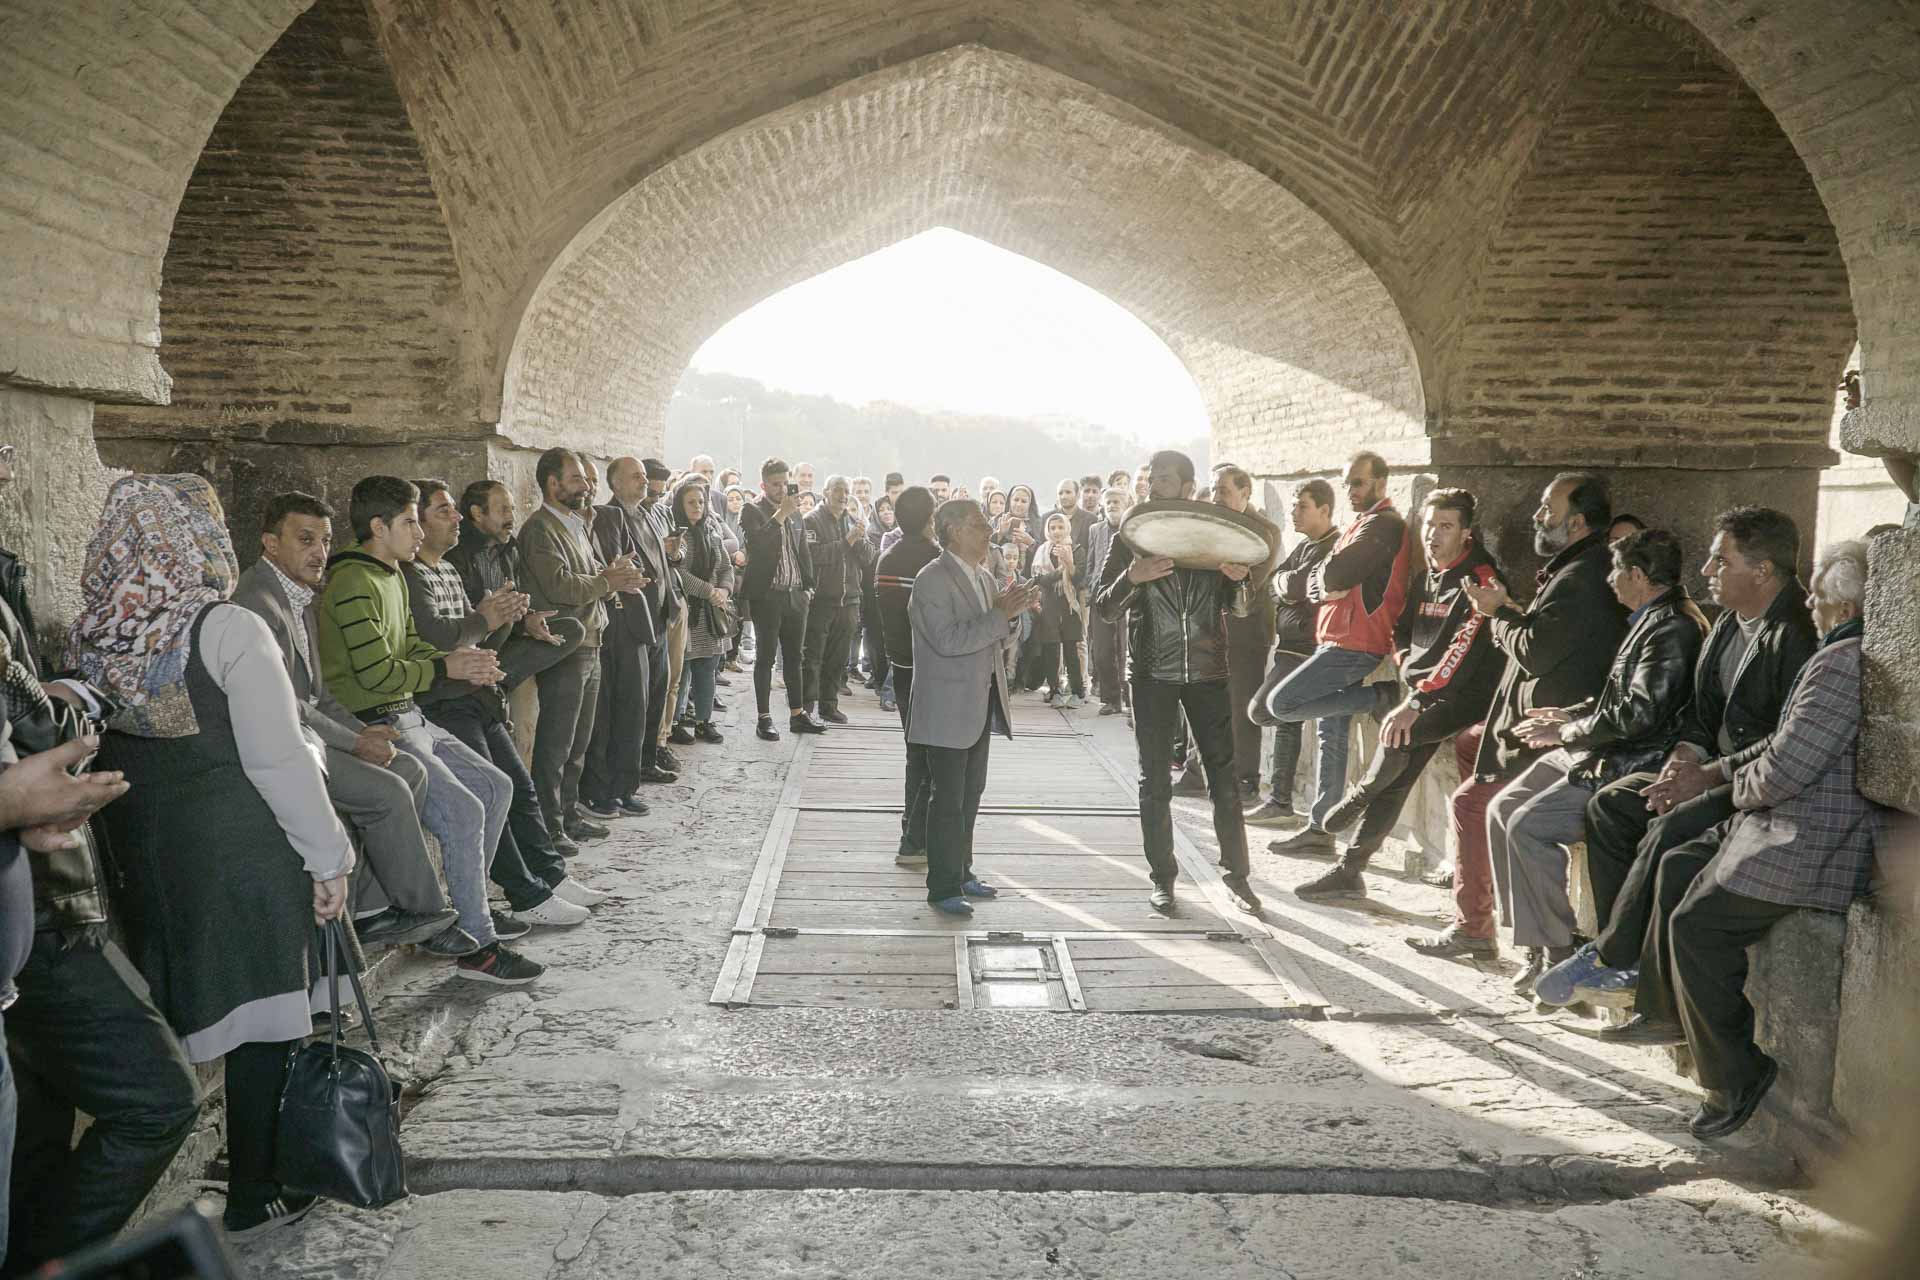 People dancing in a circle under the bridge in Isfahan